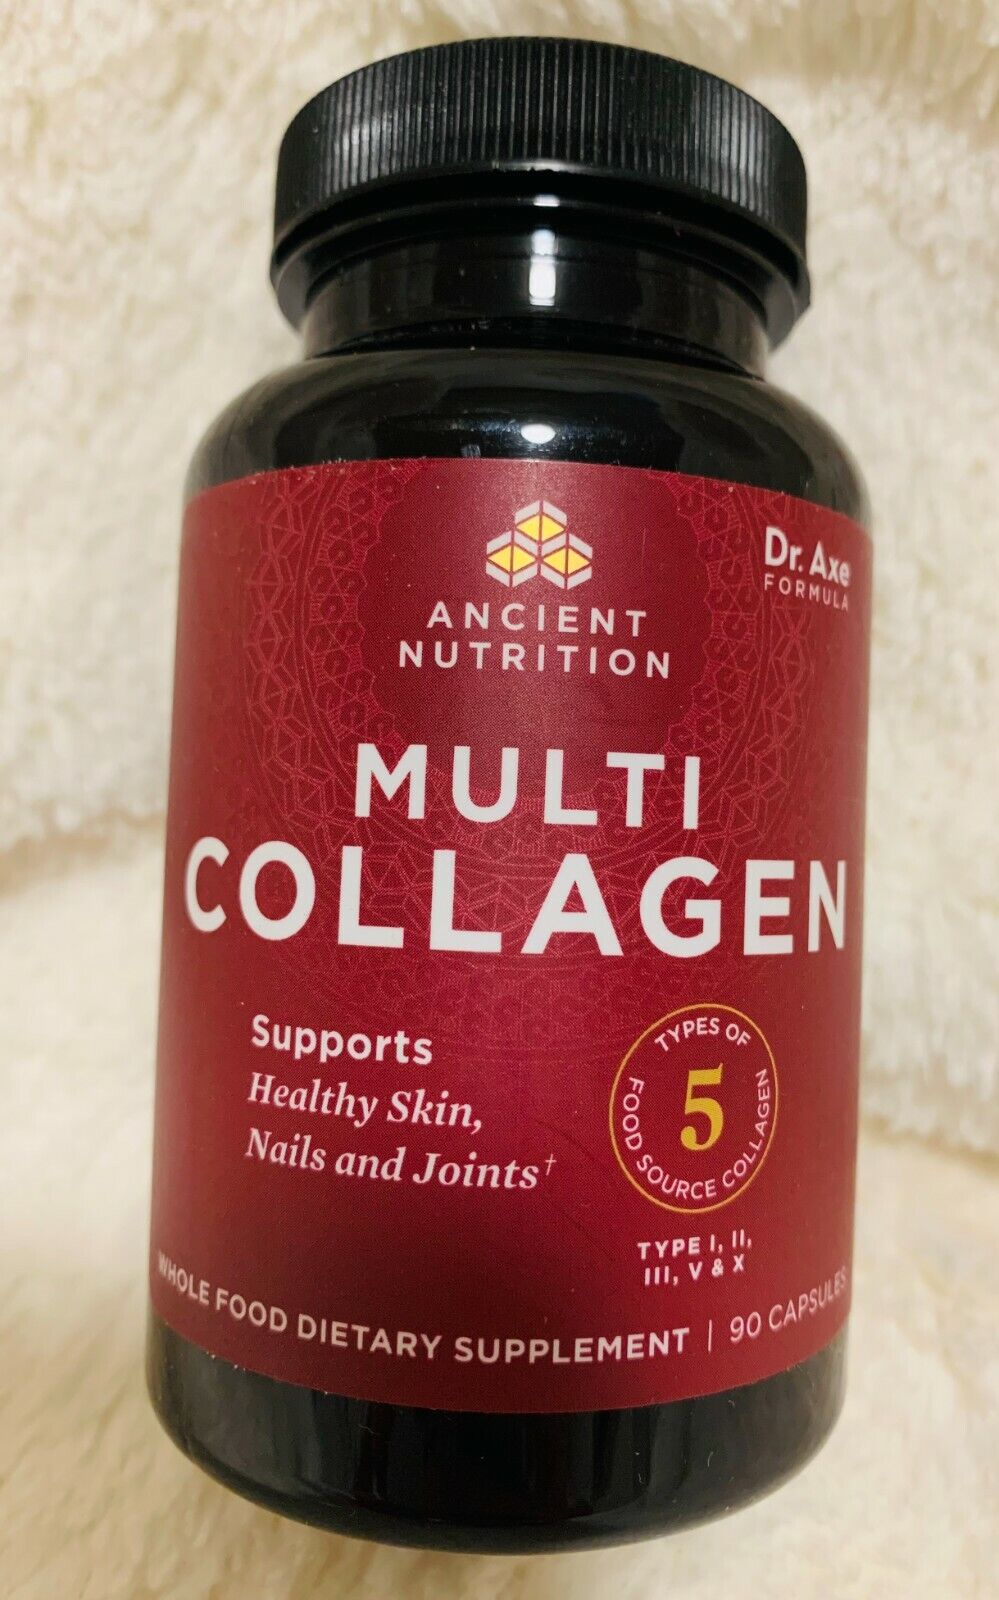 Genuine Ancient Nutrition Multi Collagen 90 Caps Exp 10/22 **FASTFREE SHIPPING**